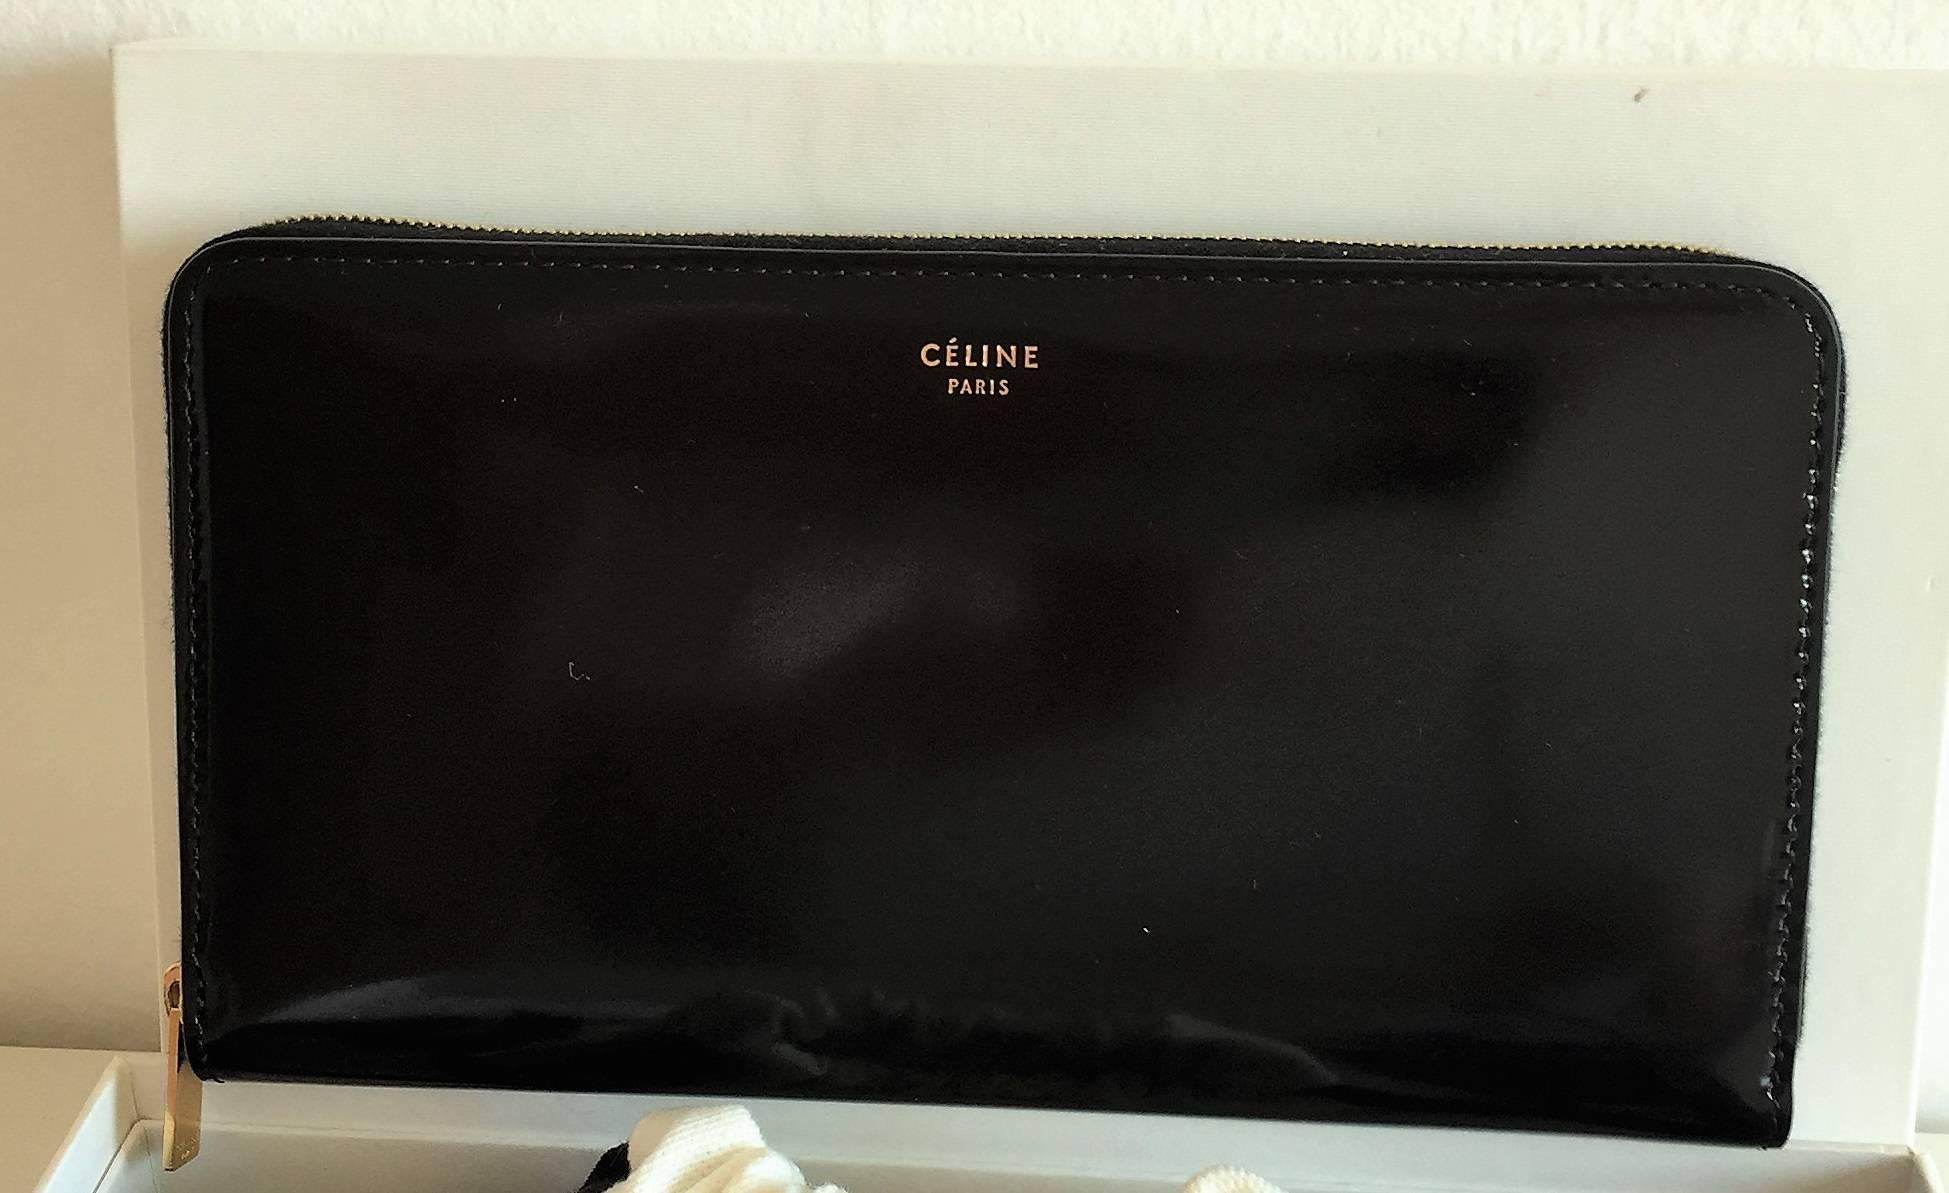 Céline Large Zipper Wallet in Vernis Black Leather, New unworn item with tag. This Zippy wallet has twelve card slots, one zipped pocket and two gusset pockets for notes. Certificate of authenticity, dust bag and box are included. 

Condition: New